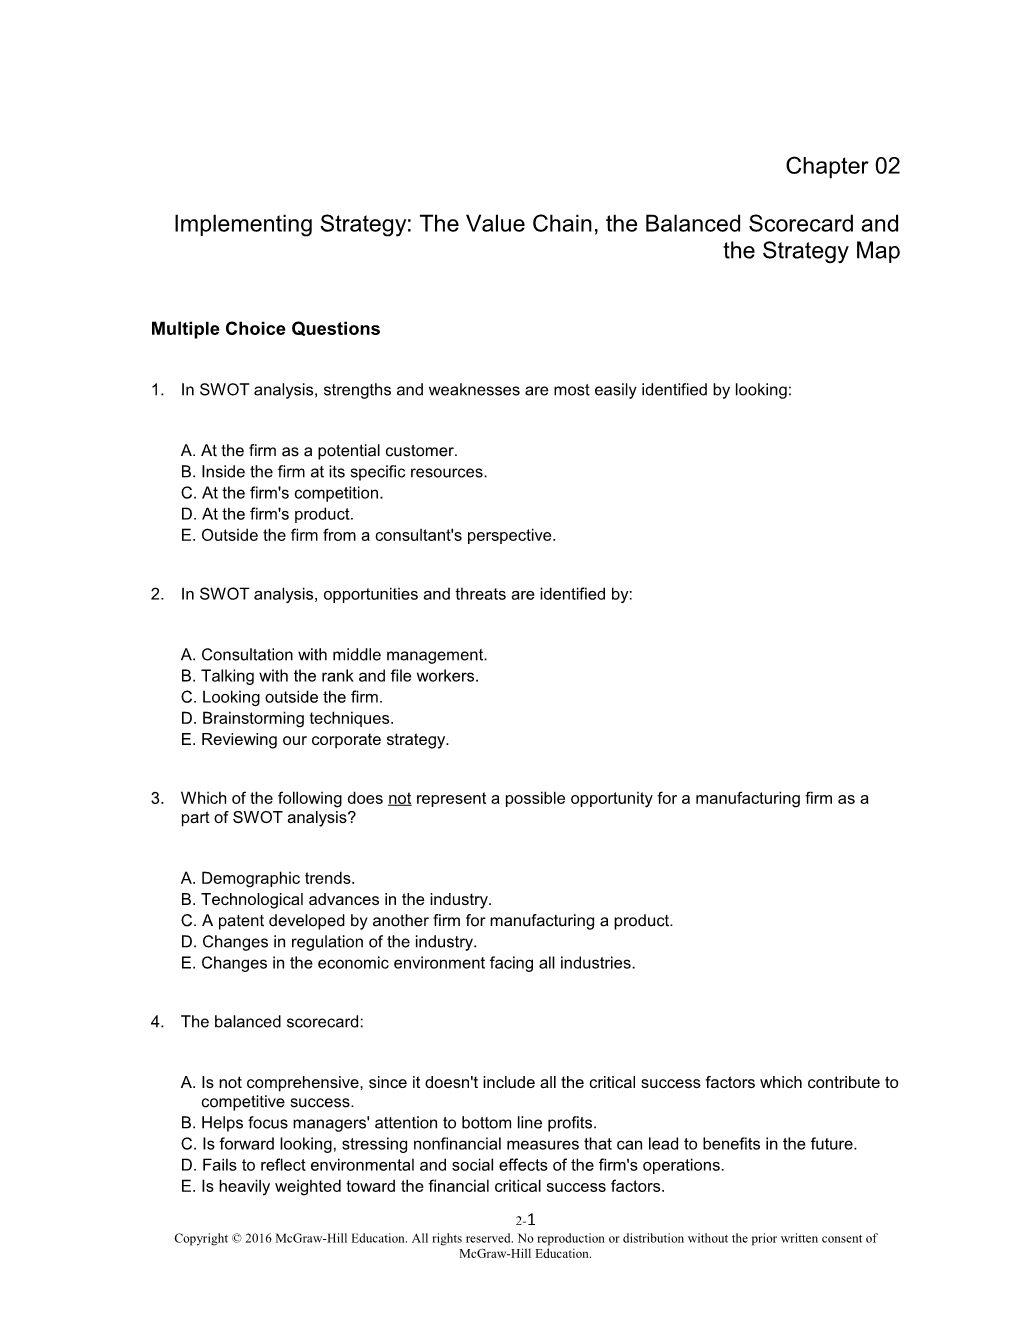 Implementing Strategy: the Value Chain, the Balanced Scorecard and the Strategy Map